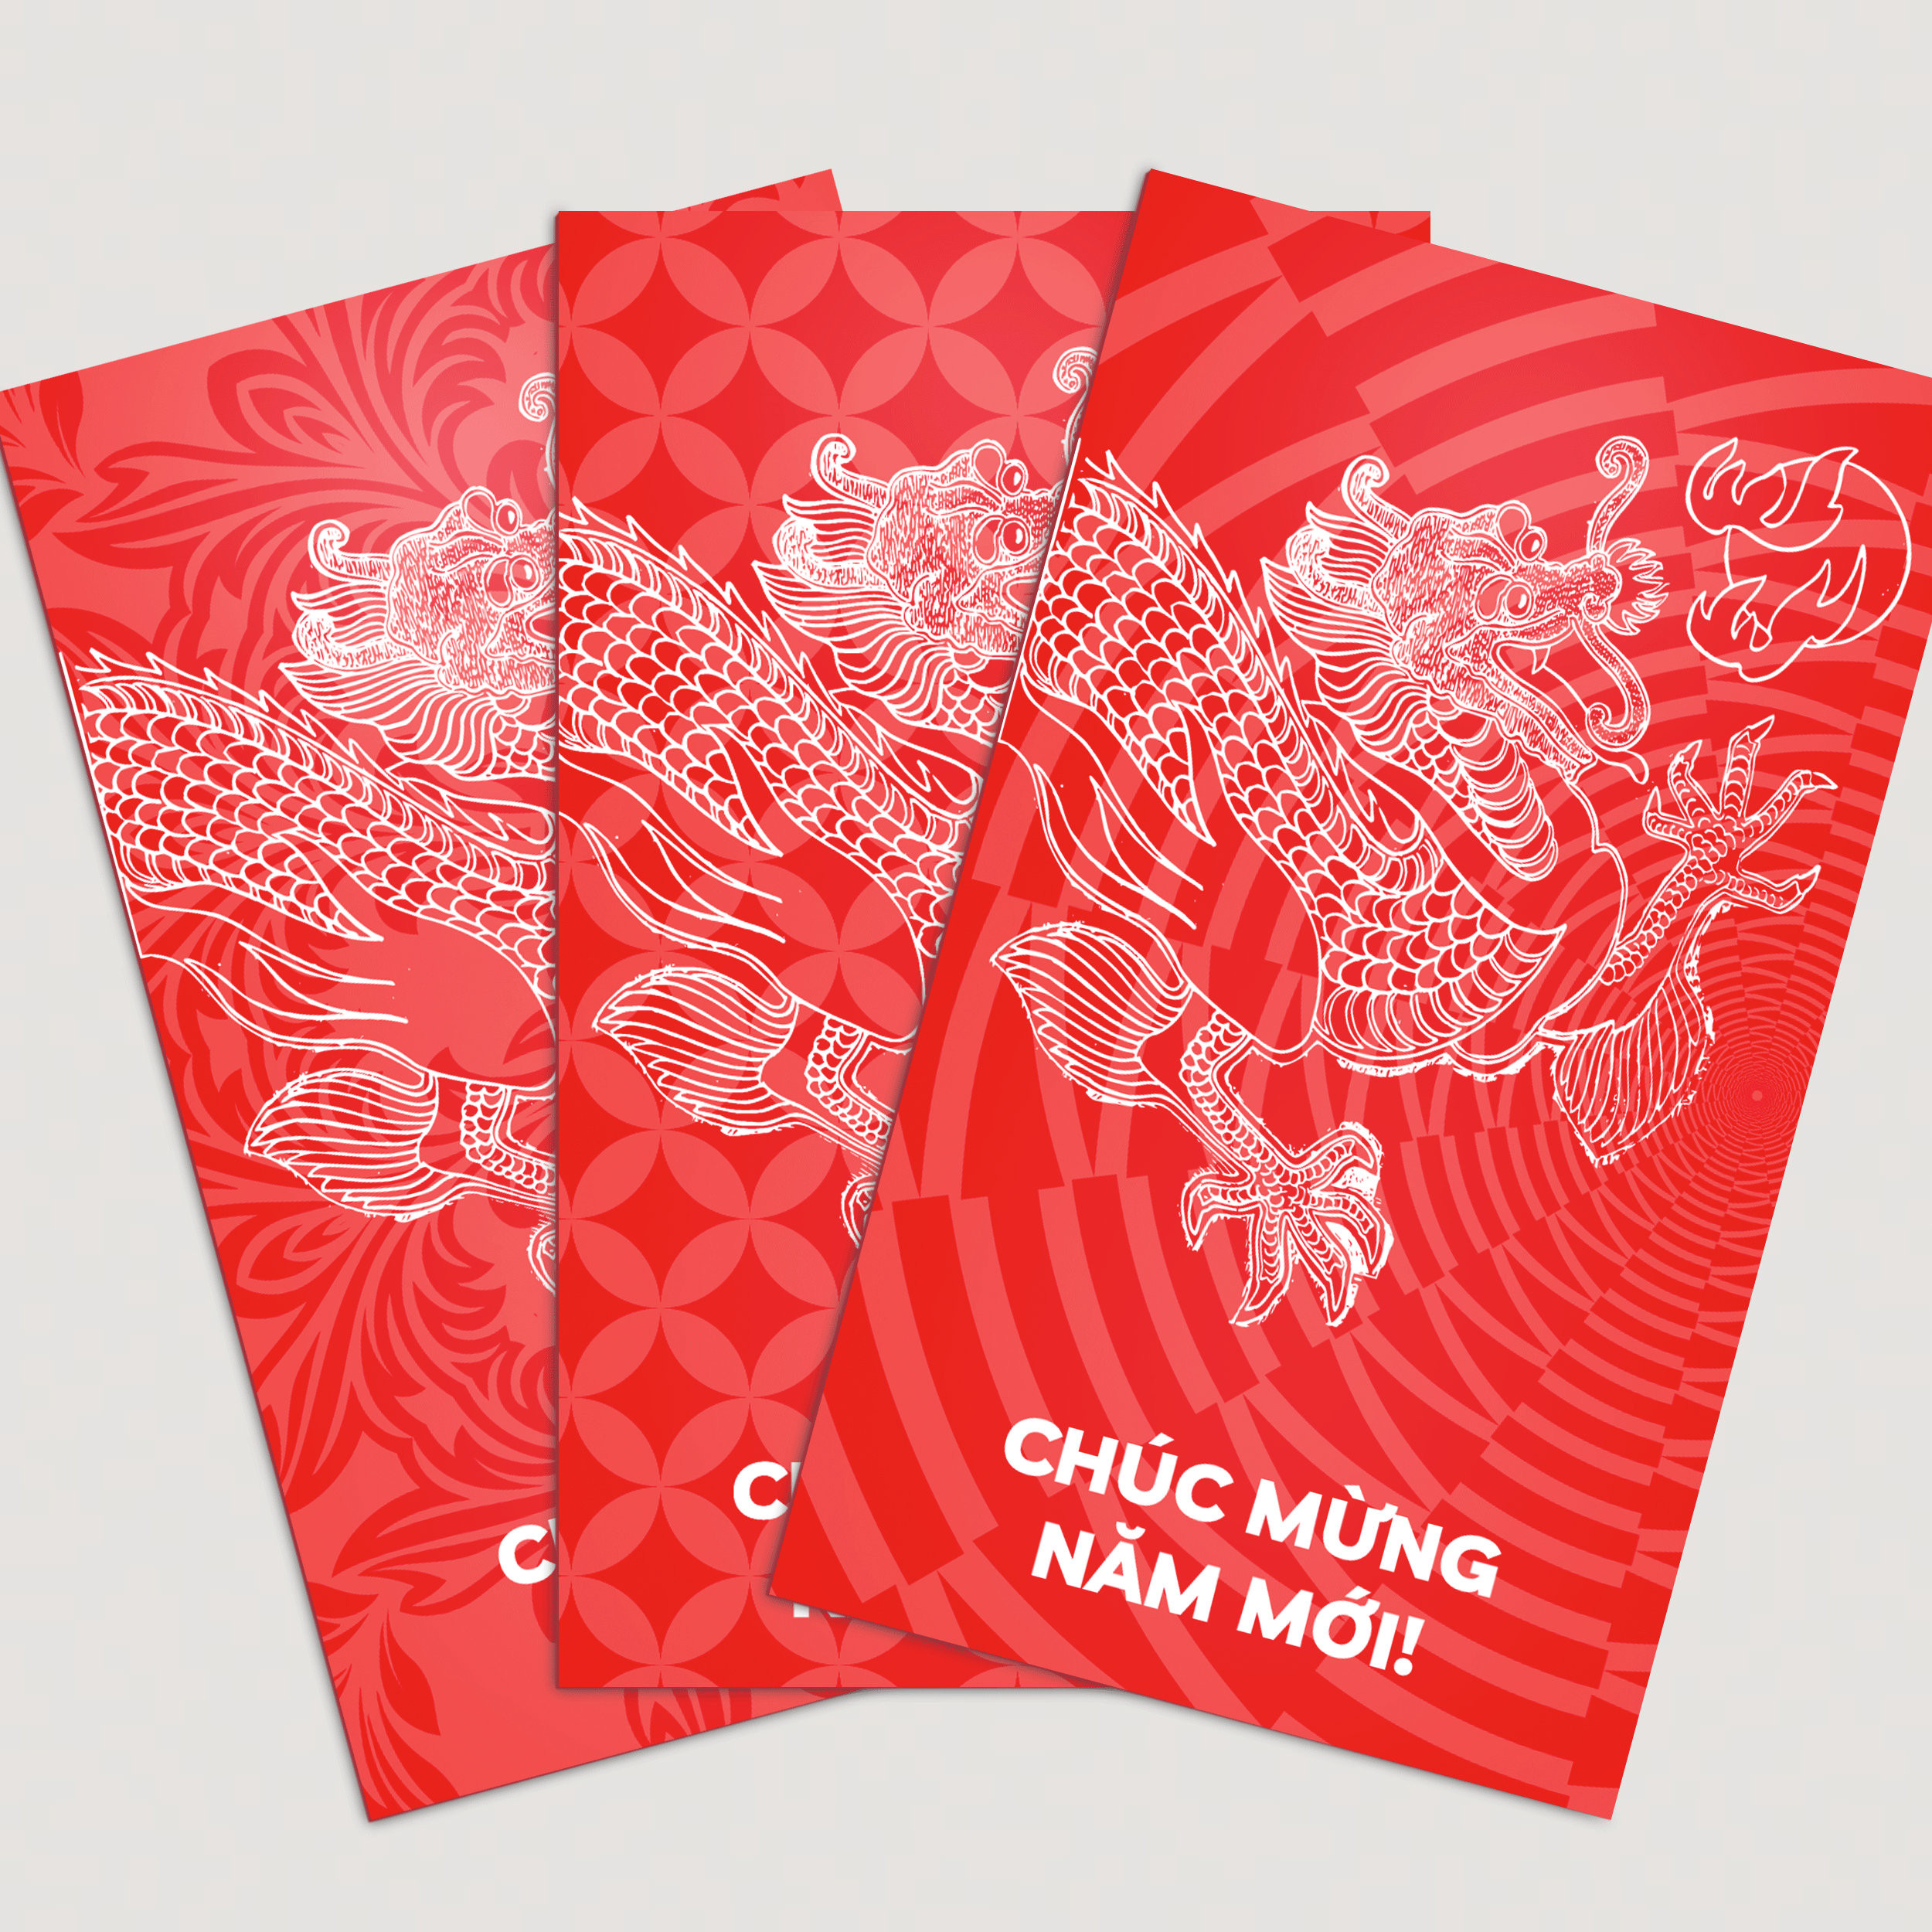 Pin by H B on CNY  Red envelope design, New year card design